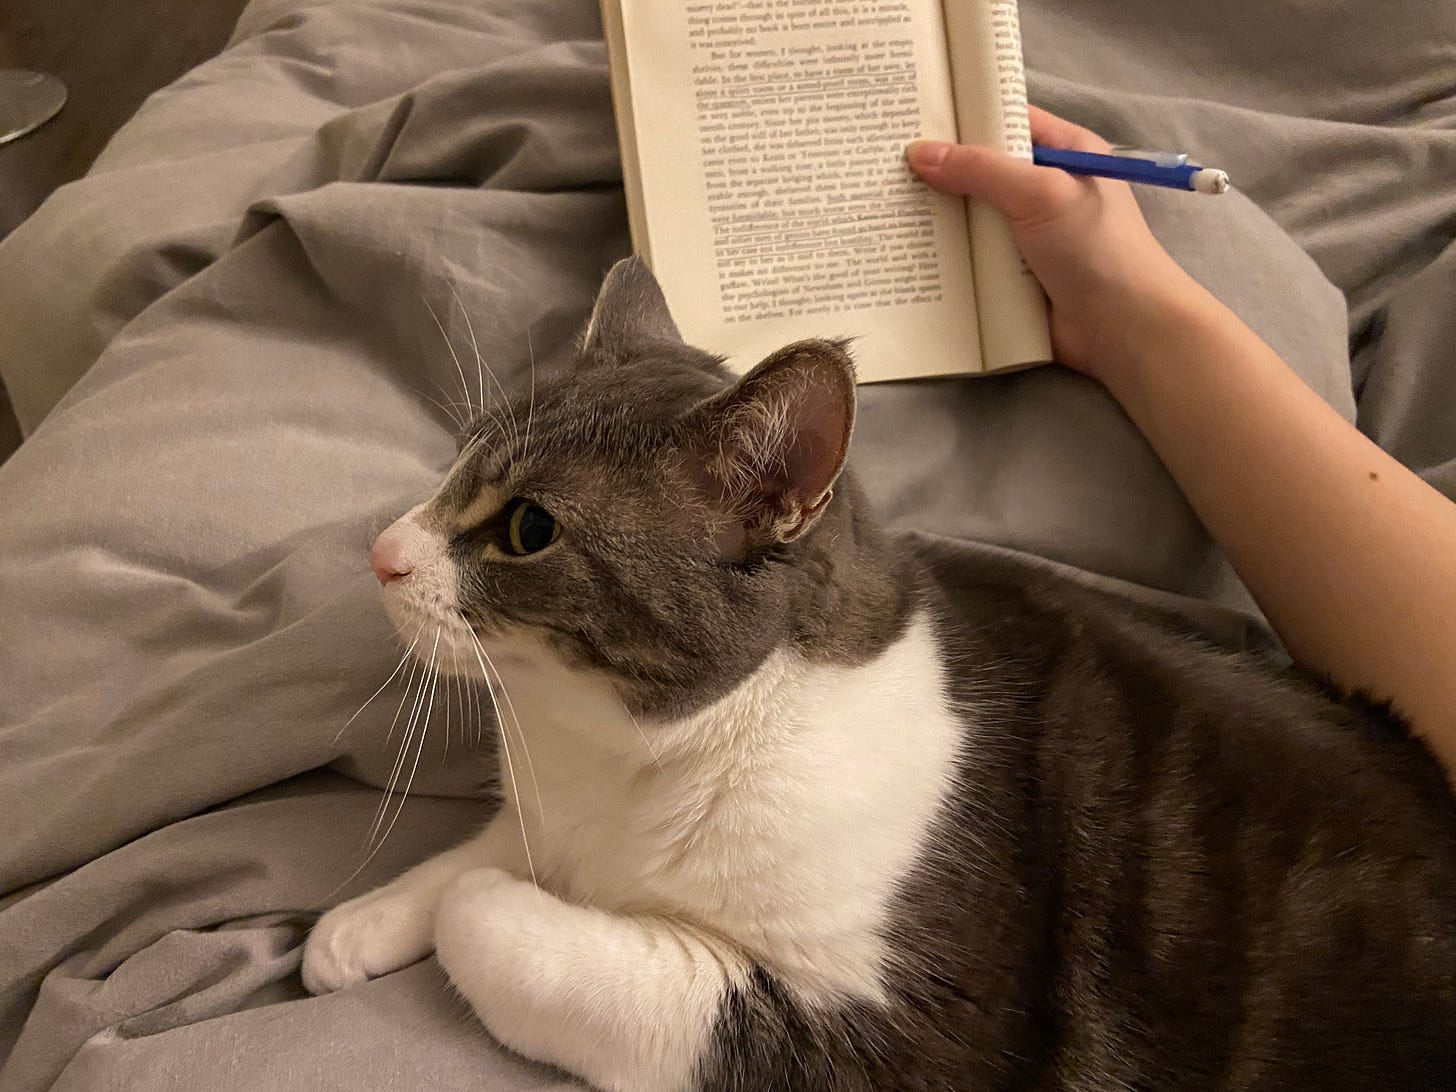 Cat chilling on her human, oblivious to the latter's uncomfortable reading position.